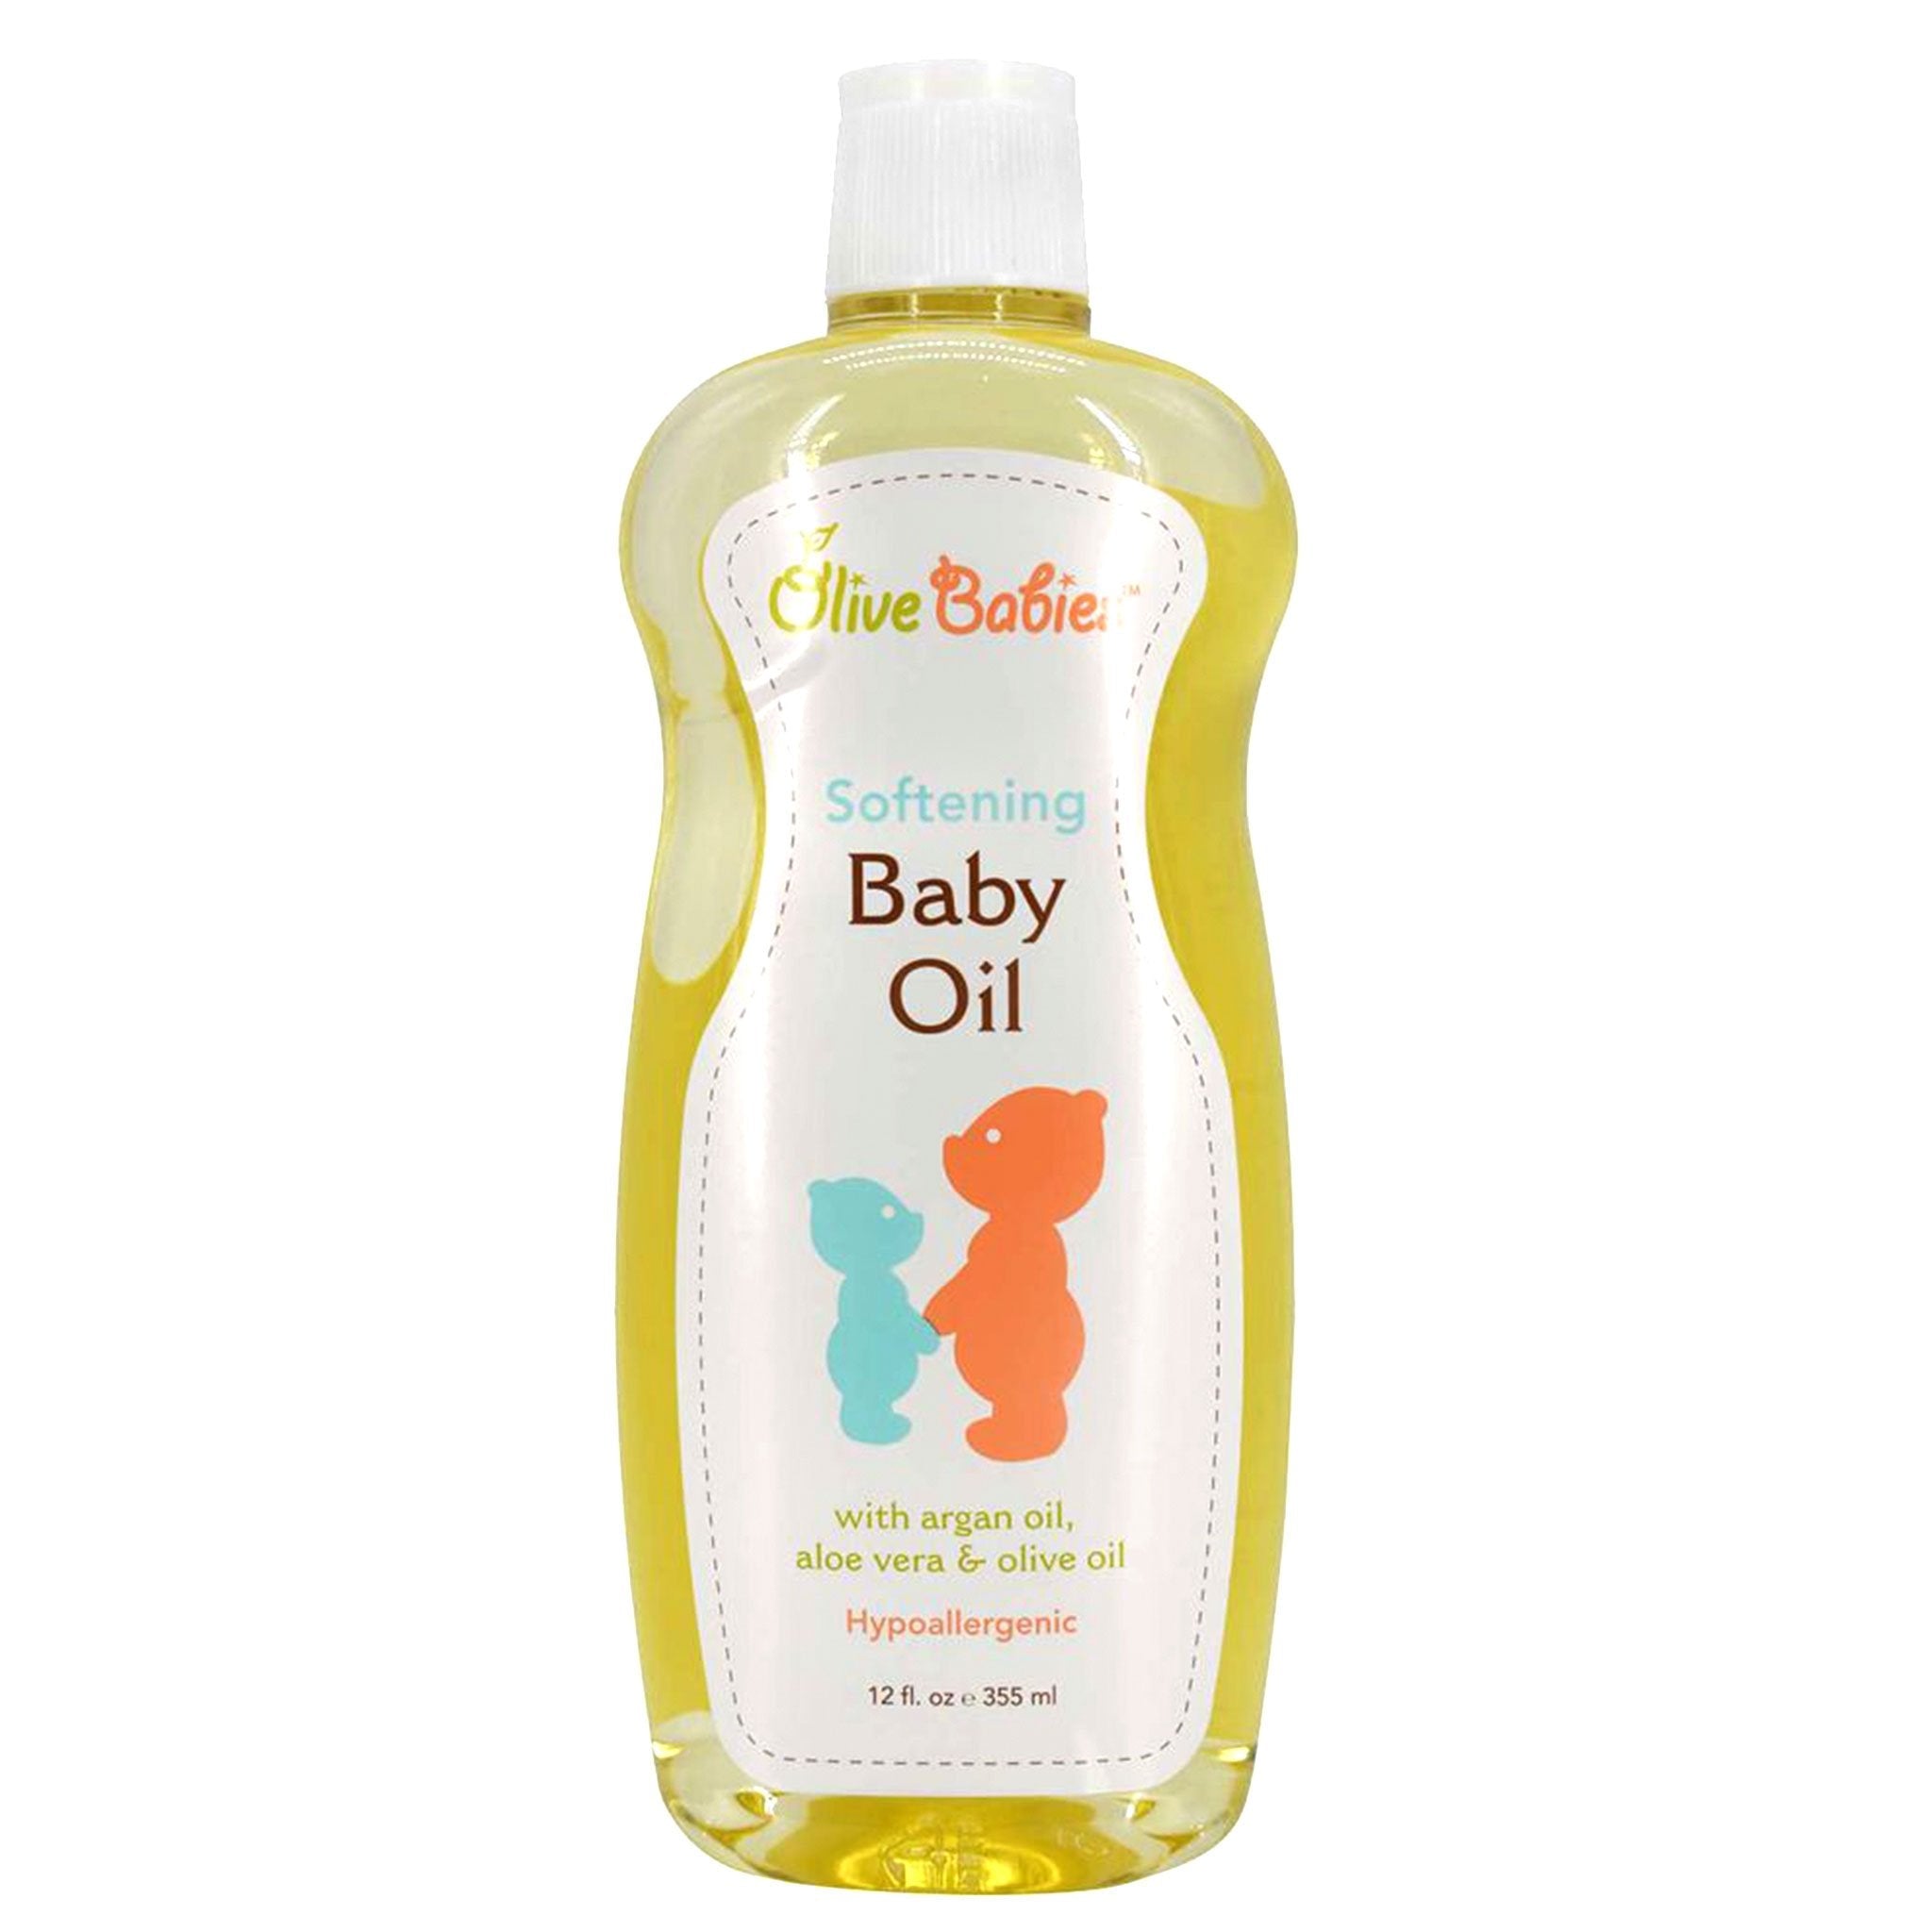 Olive Babies Softening Baby Oil 12floz355ml  With Argan OIl and Olive OilHypoallergenic